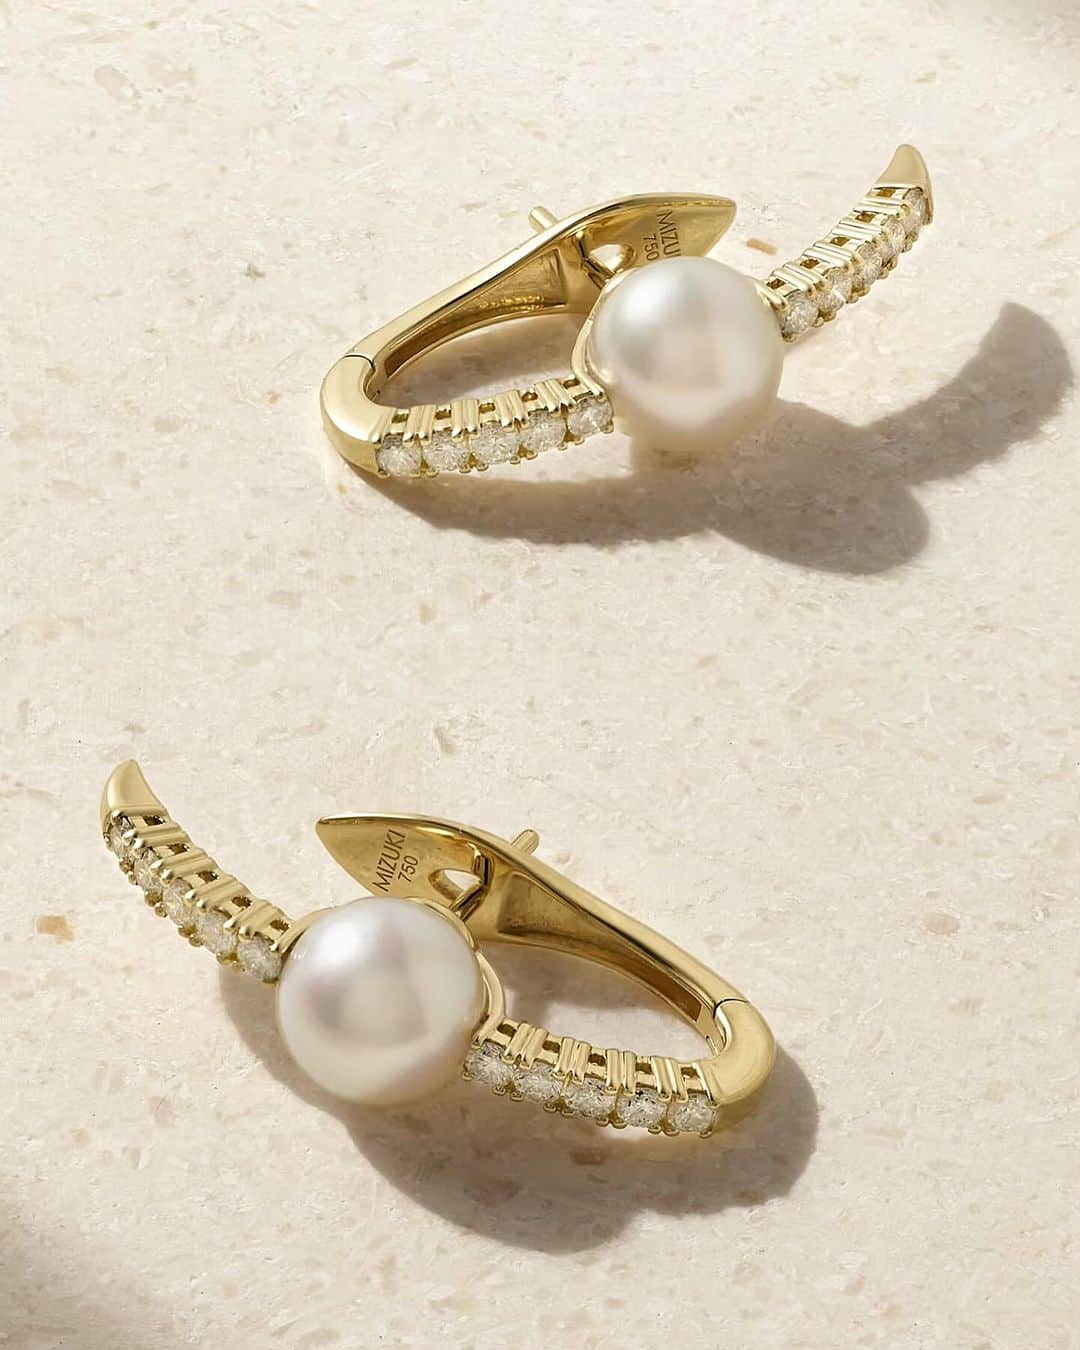 M I Z U K Iのインスタグラム：「Just in Time 💝   MIZUKI Prive collection is now available on Net A Porter @netaporter   . . . #netaporter #mizuki #mizukijewels  #mizukijewelry #prive #modern #pearl #diamond #earrings #💝」